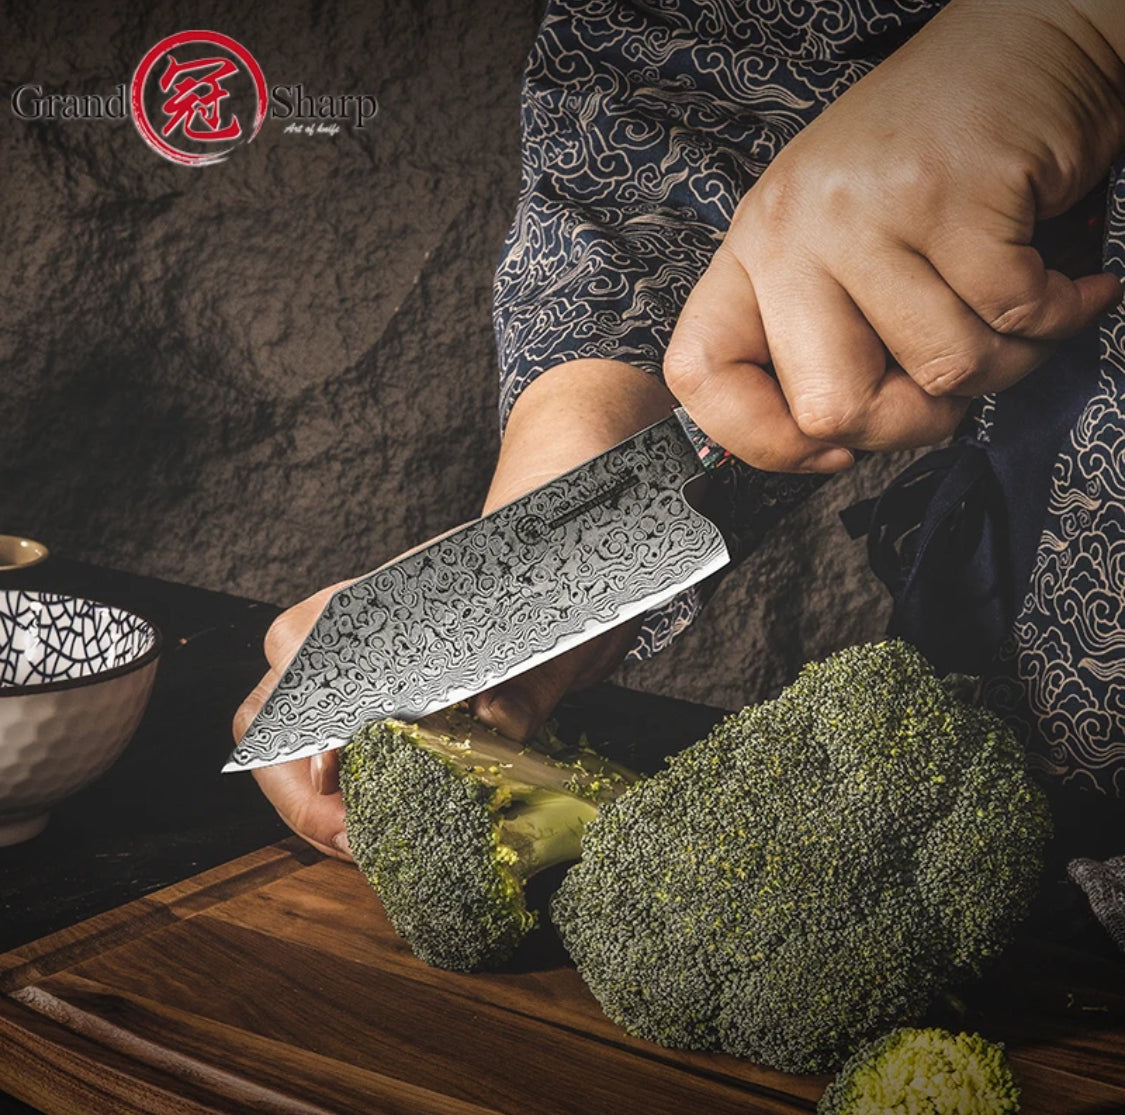 Damascus Knife 5.5 inch Kiritsuke Kitchen Chef Japanese Knife AUS-10 High Carbon Stainless Steel Knives Cooking Tools Grandsharp